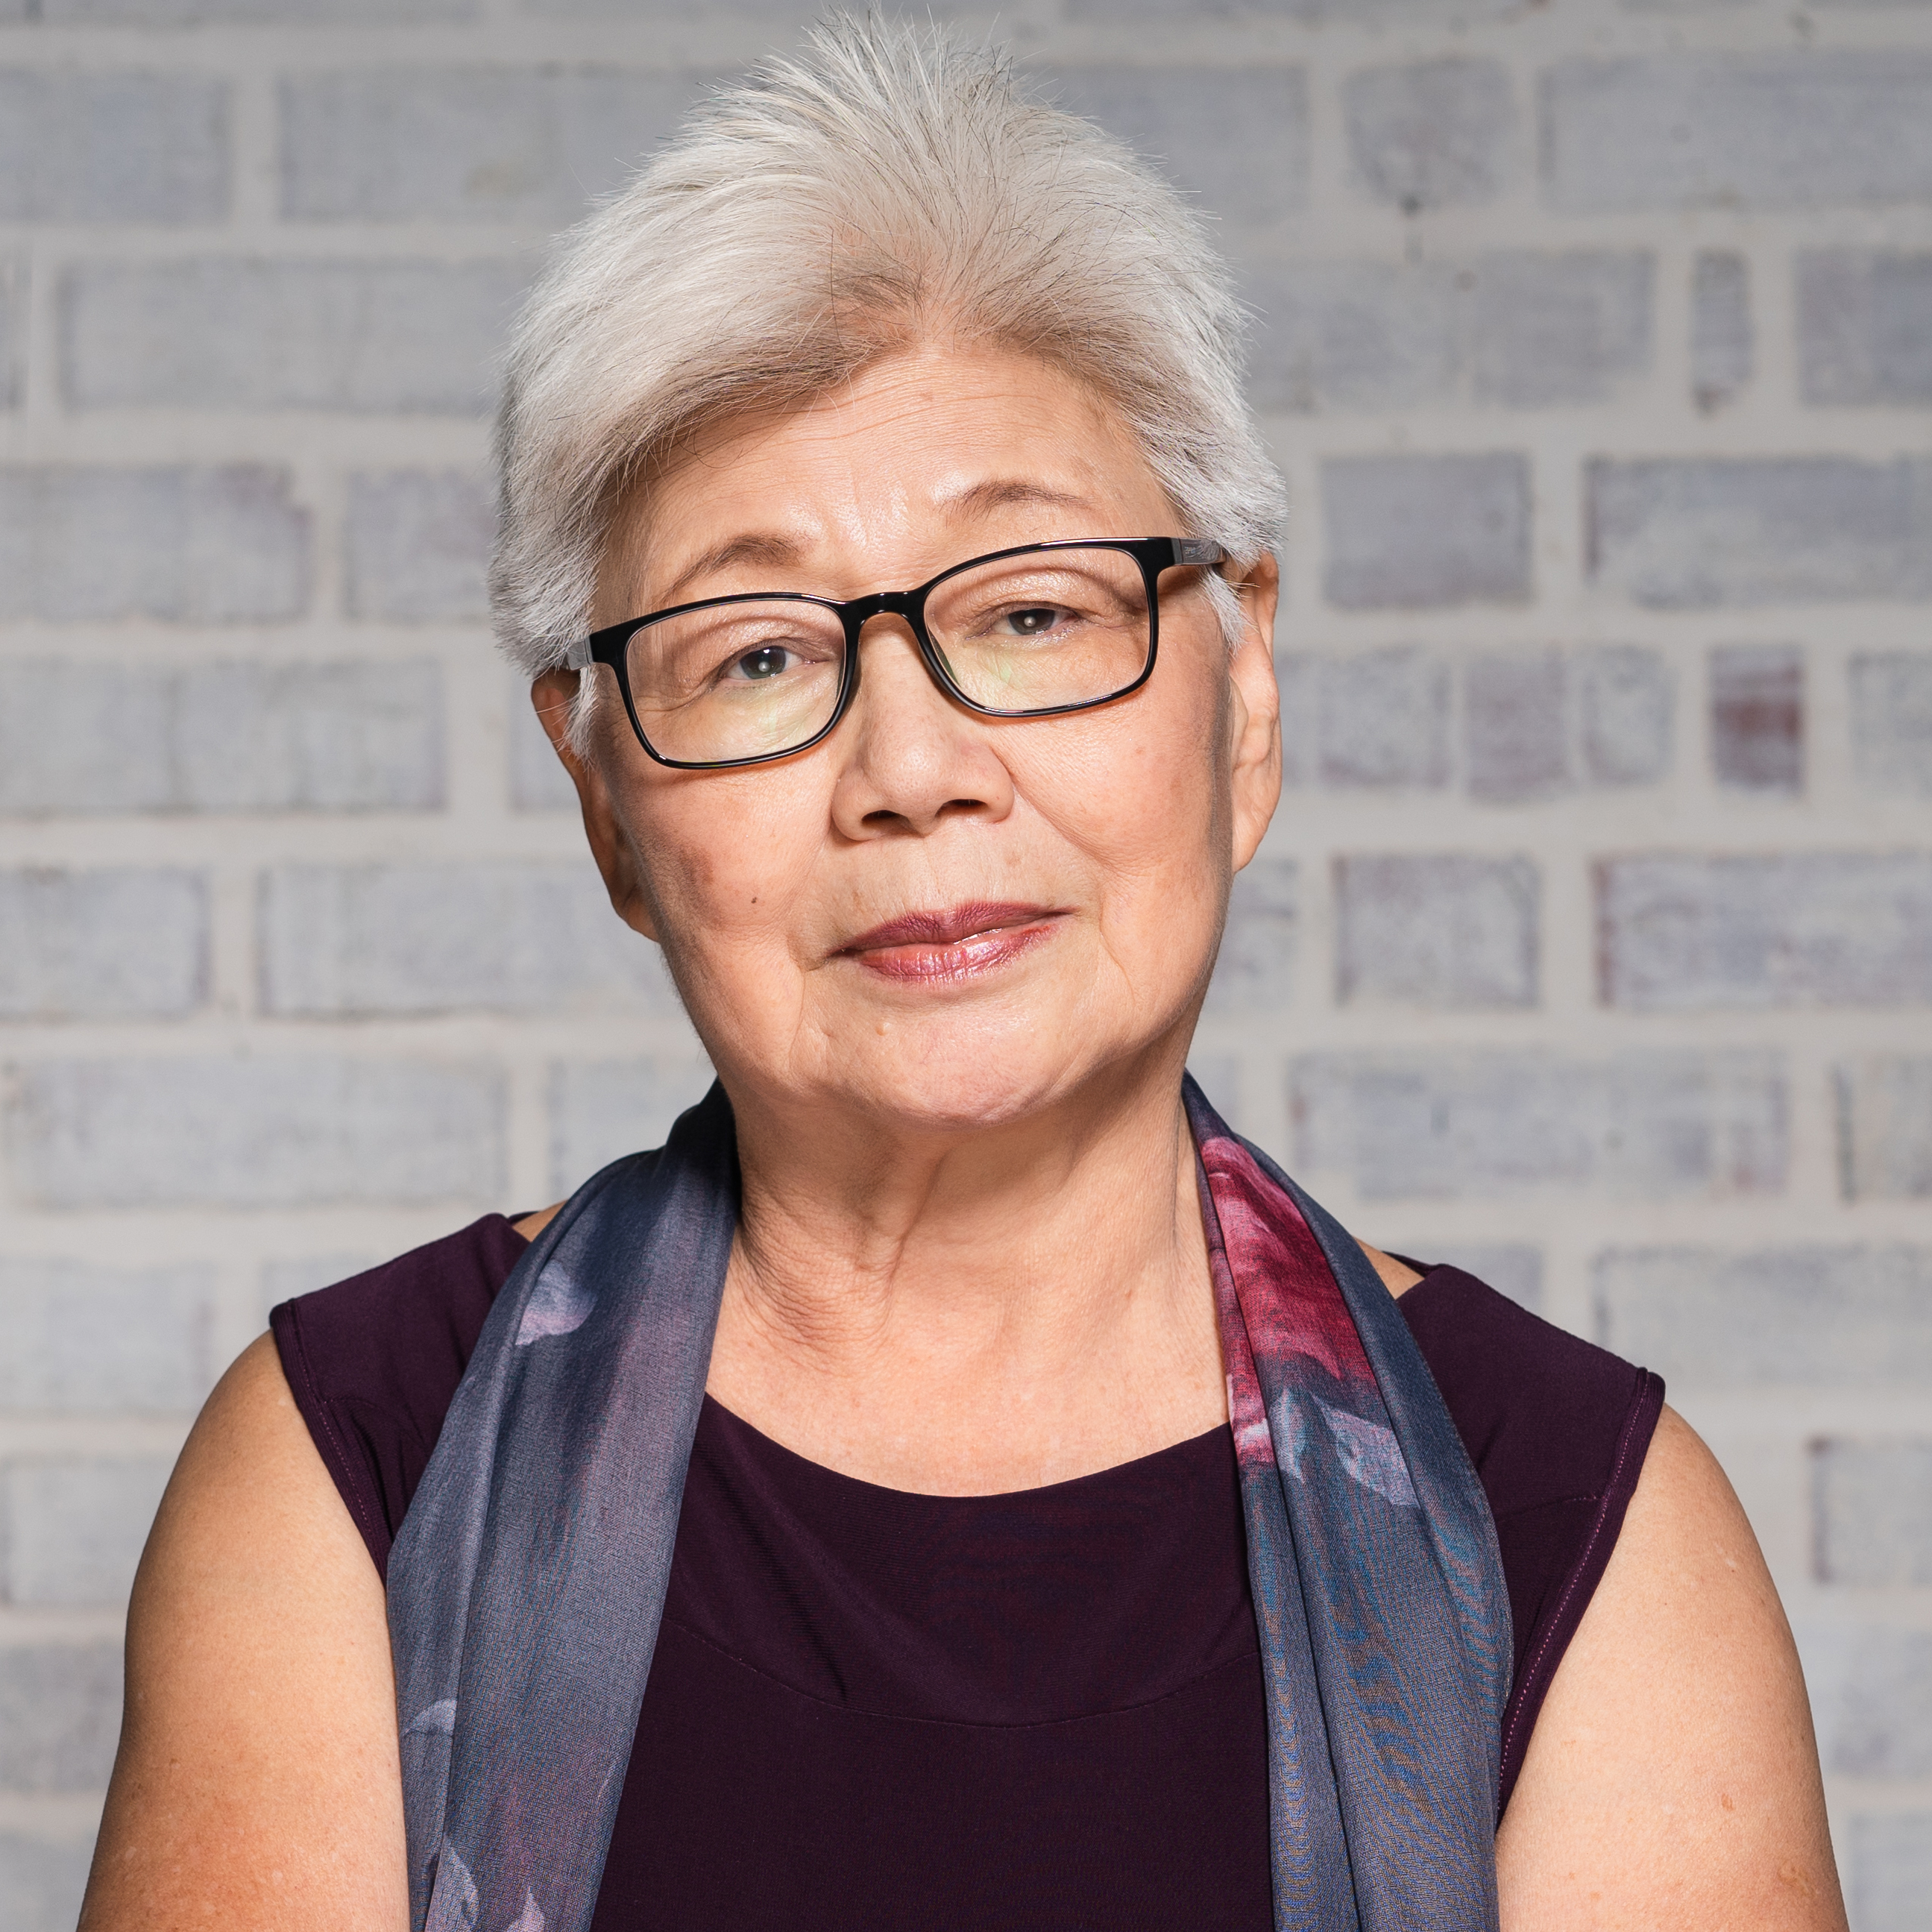 Portrait of Mature Asian Woman staring into camera in front of grey brick wall